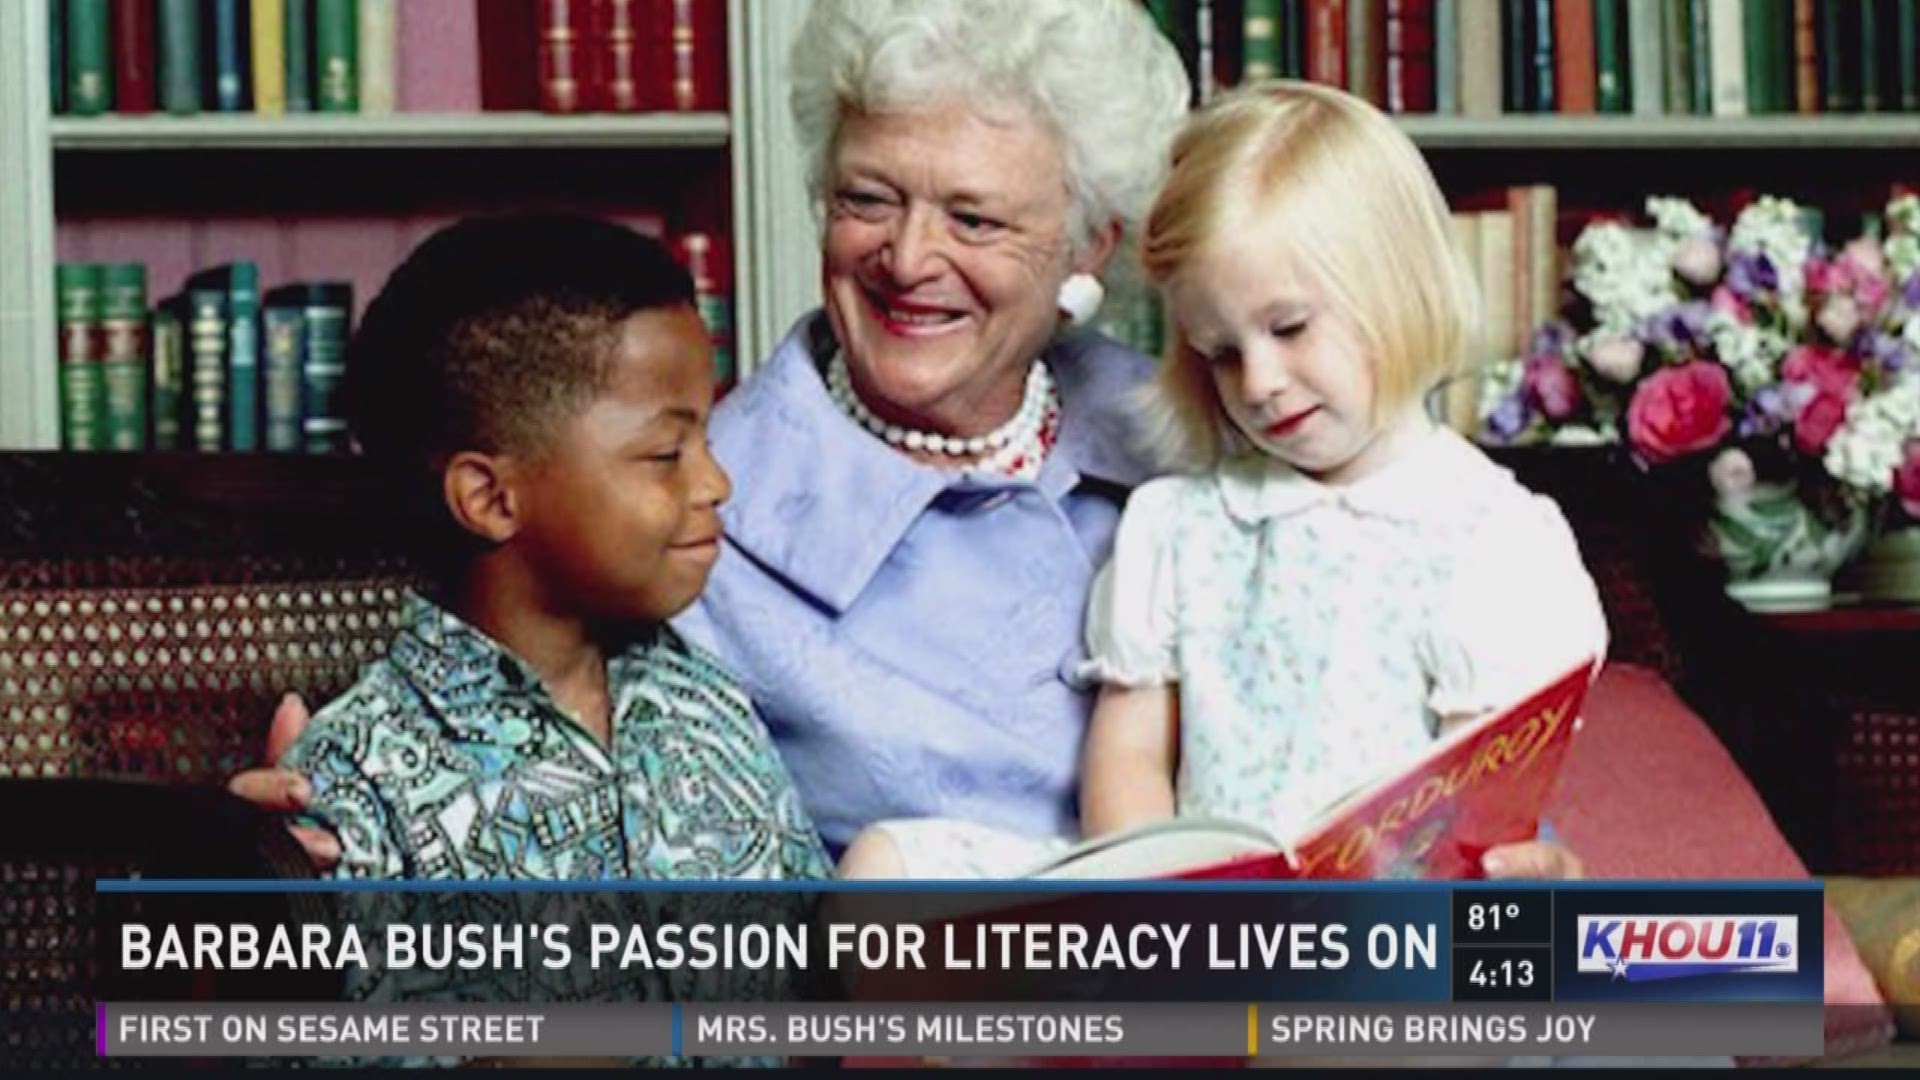 Barbara Bush championed literacy as First Lady and that legacy will live on through the foundation she inspired in Houston. It helps young and old harness the power of reading.